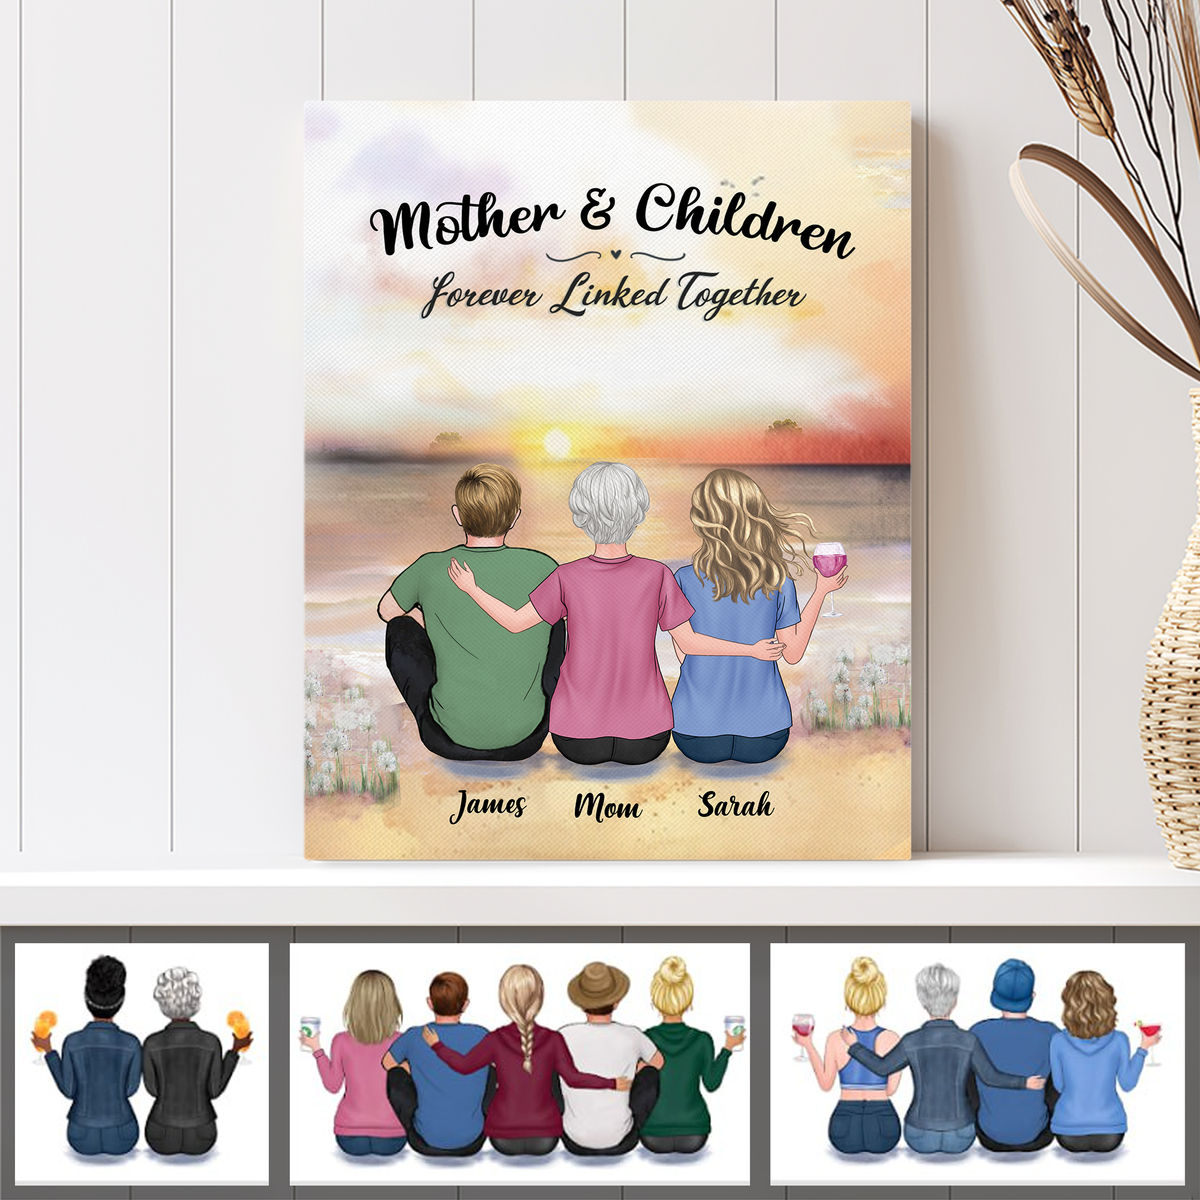 Personalized Wrapped Canvas - Mother's Day Canvas - Mother and Children Forever Linked Together - Birthday Gift, Mother's Day Gift For Mom_2